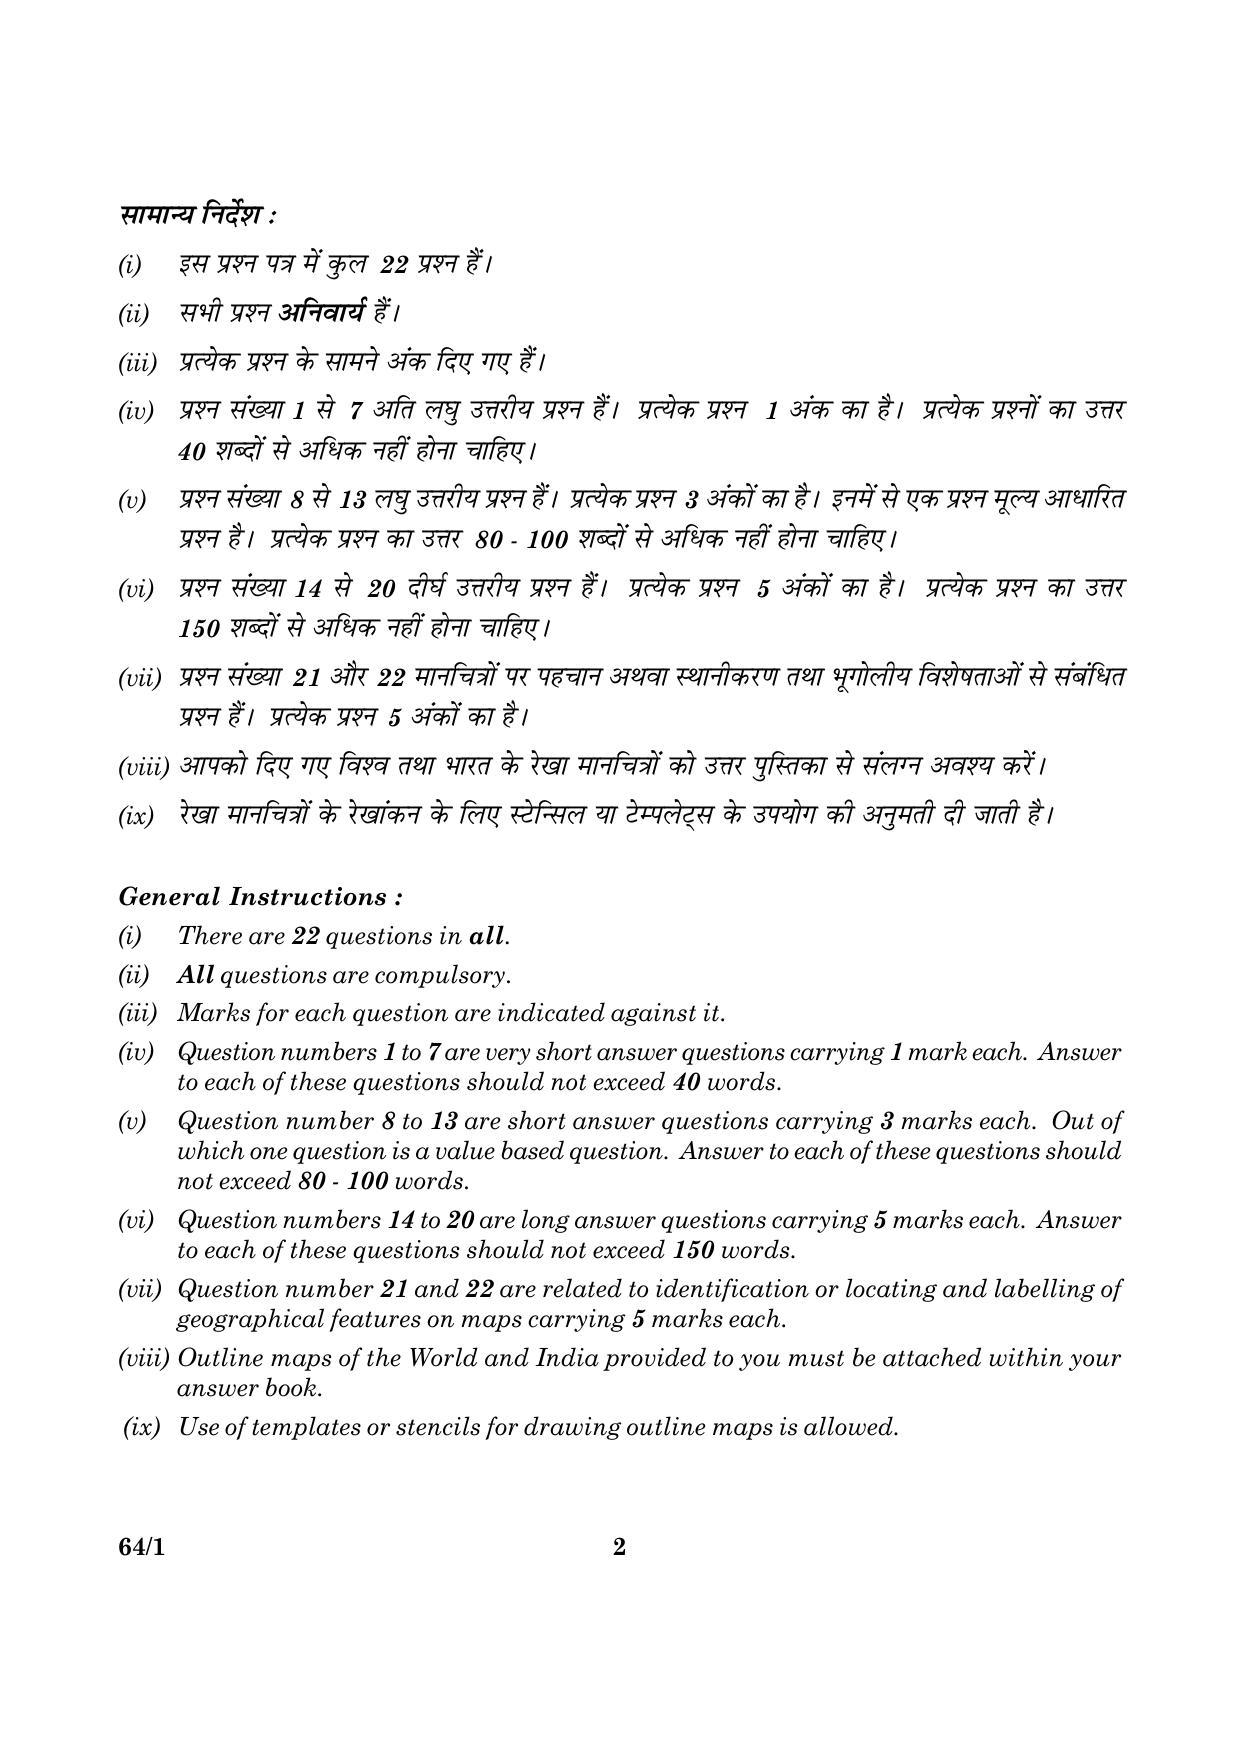 CBSE Class 12 064 Set 1 Geography 2016 Question Paper - Page 2